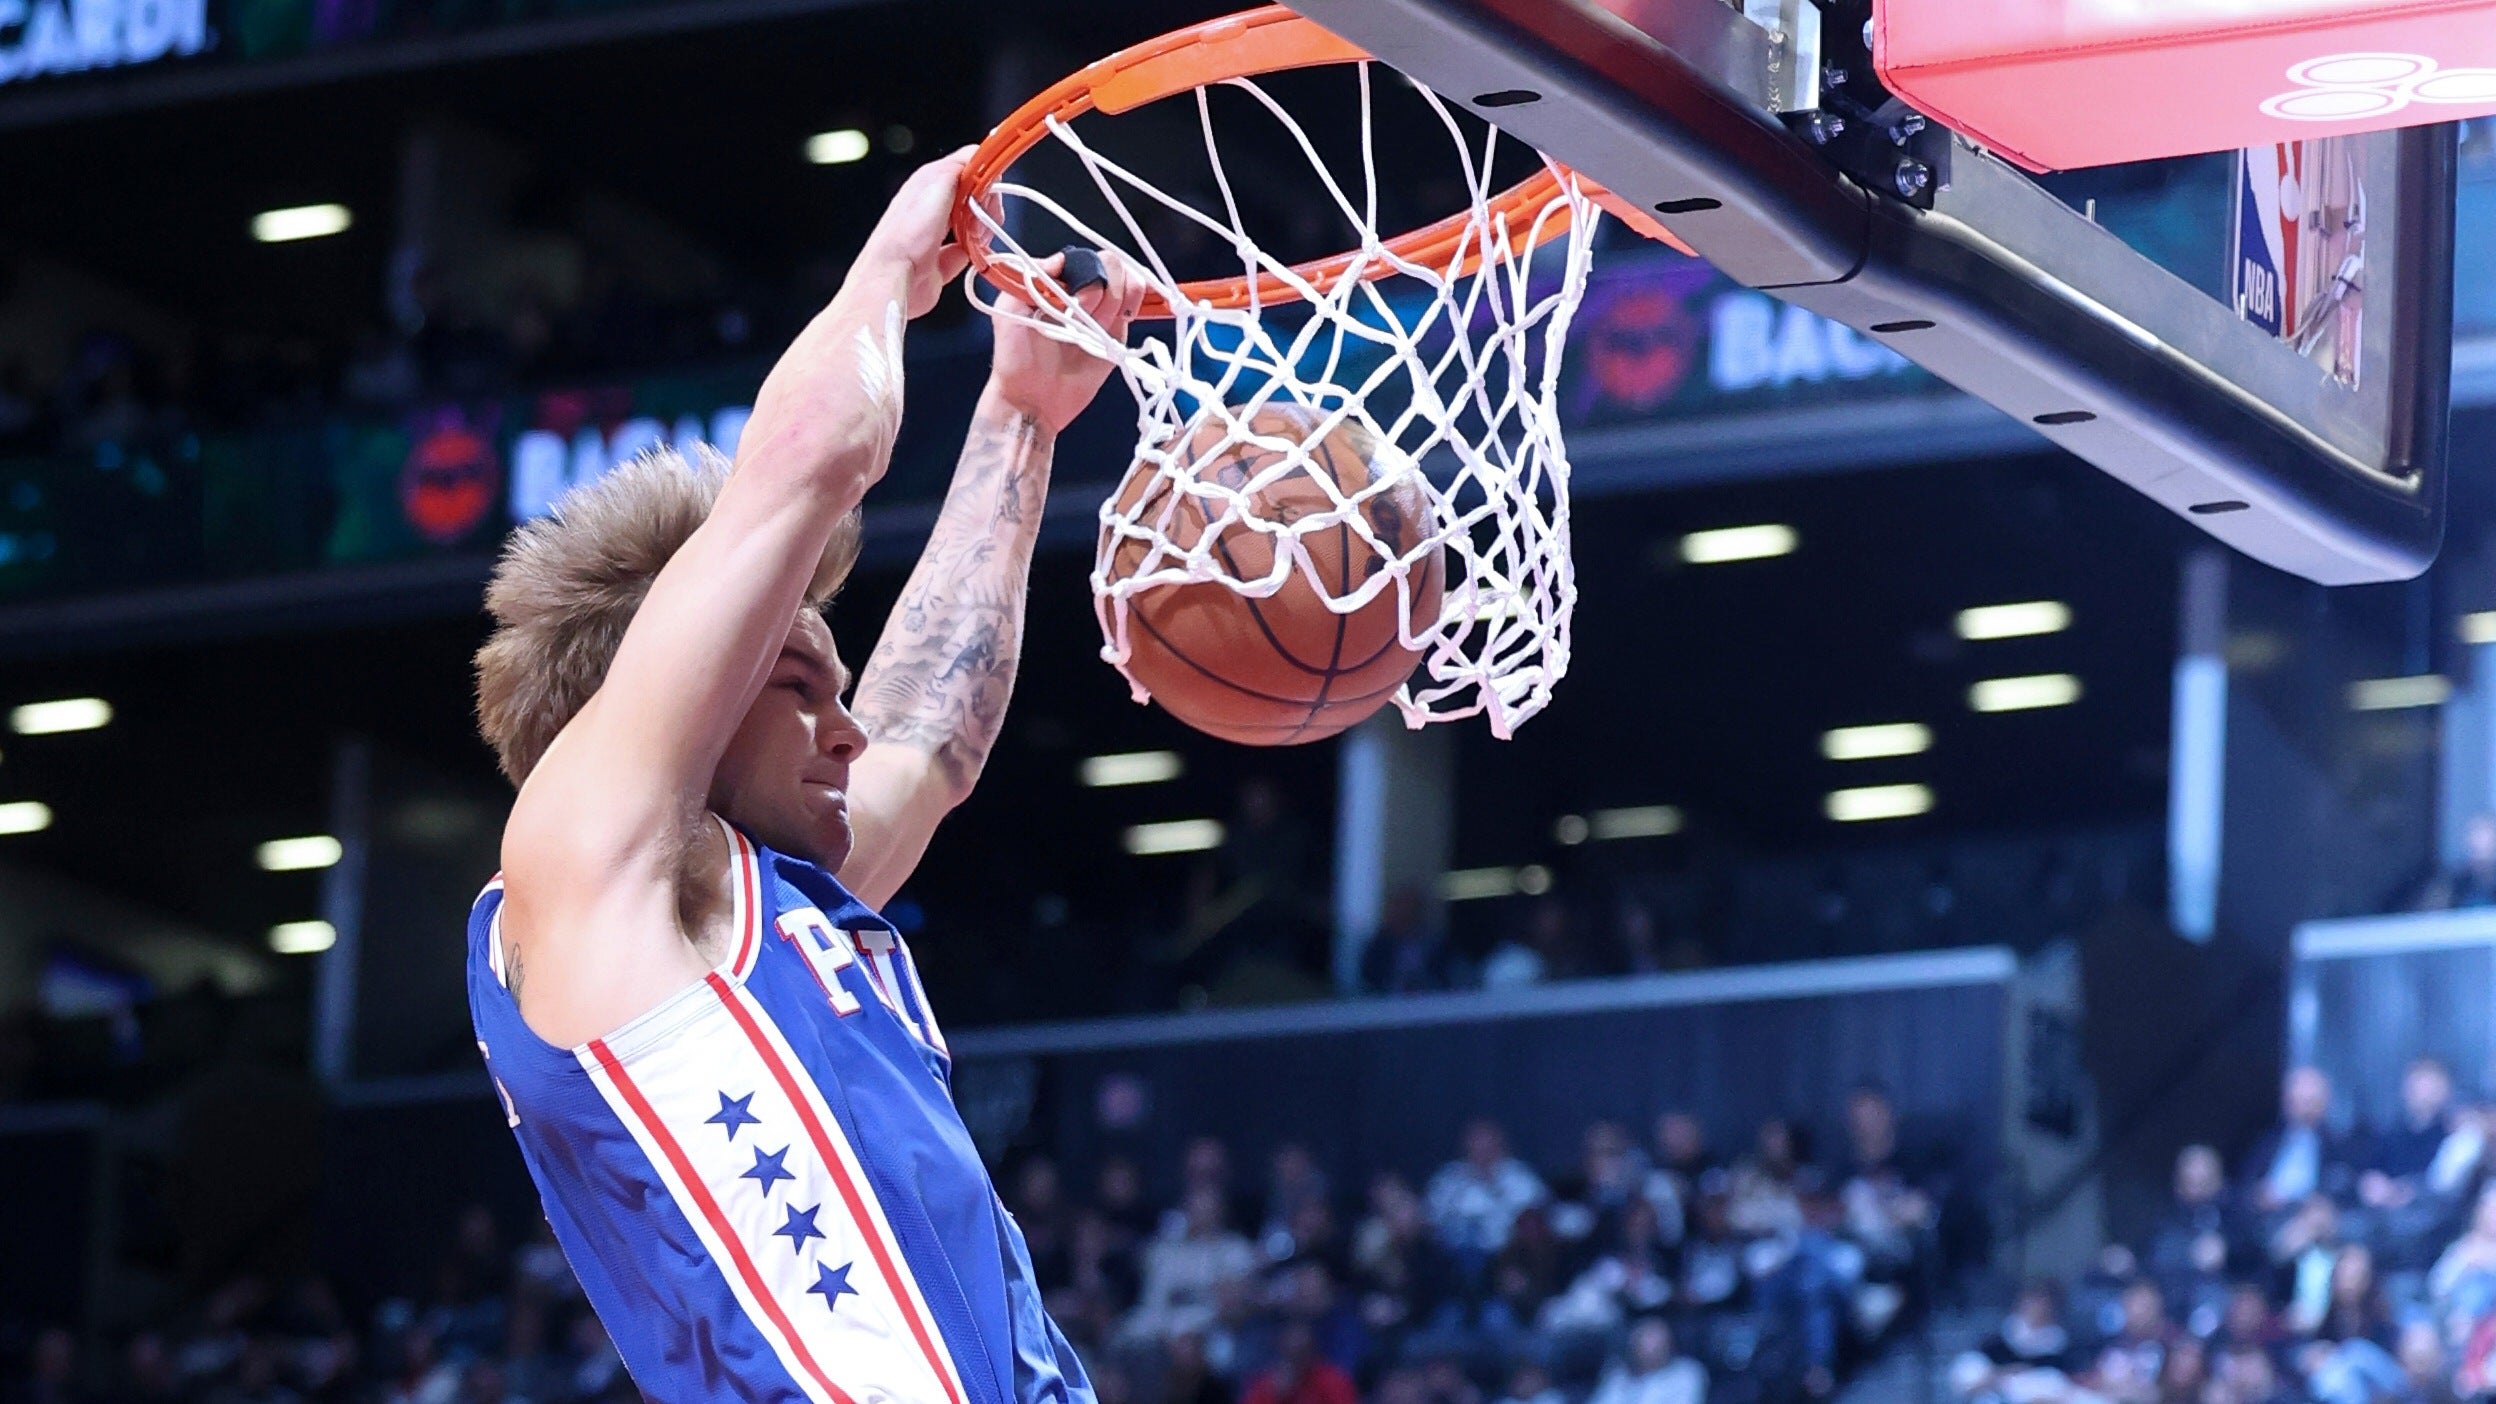 76ers take aim at Nets, hope for 1st NBA title since 1983